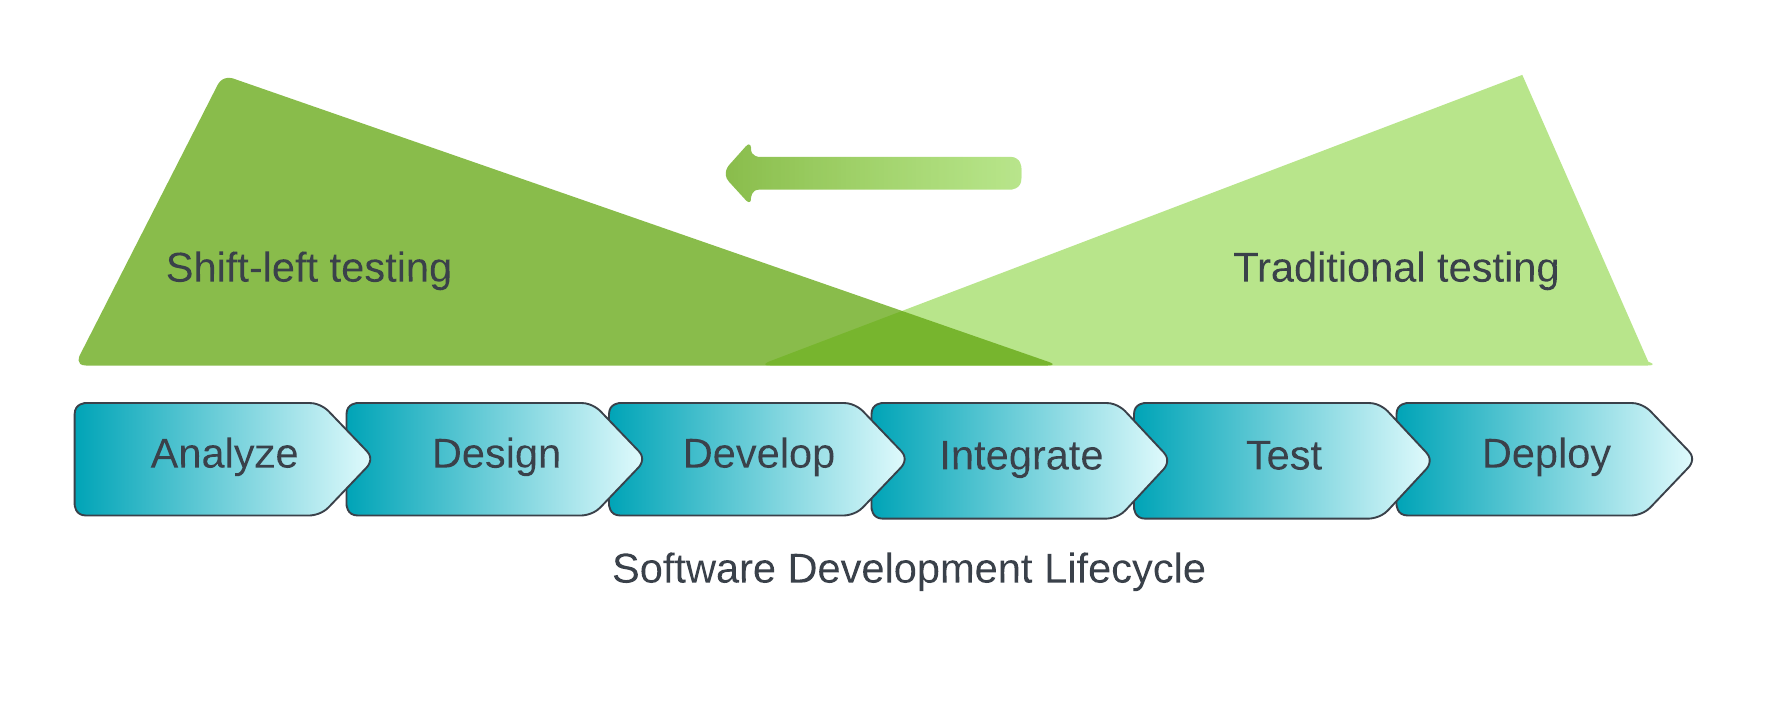 A diagram showing shift-left testing in the context of the software development lifecycle